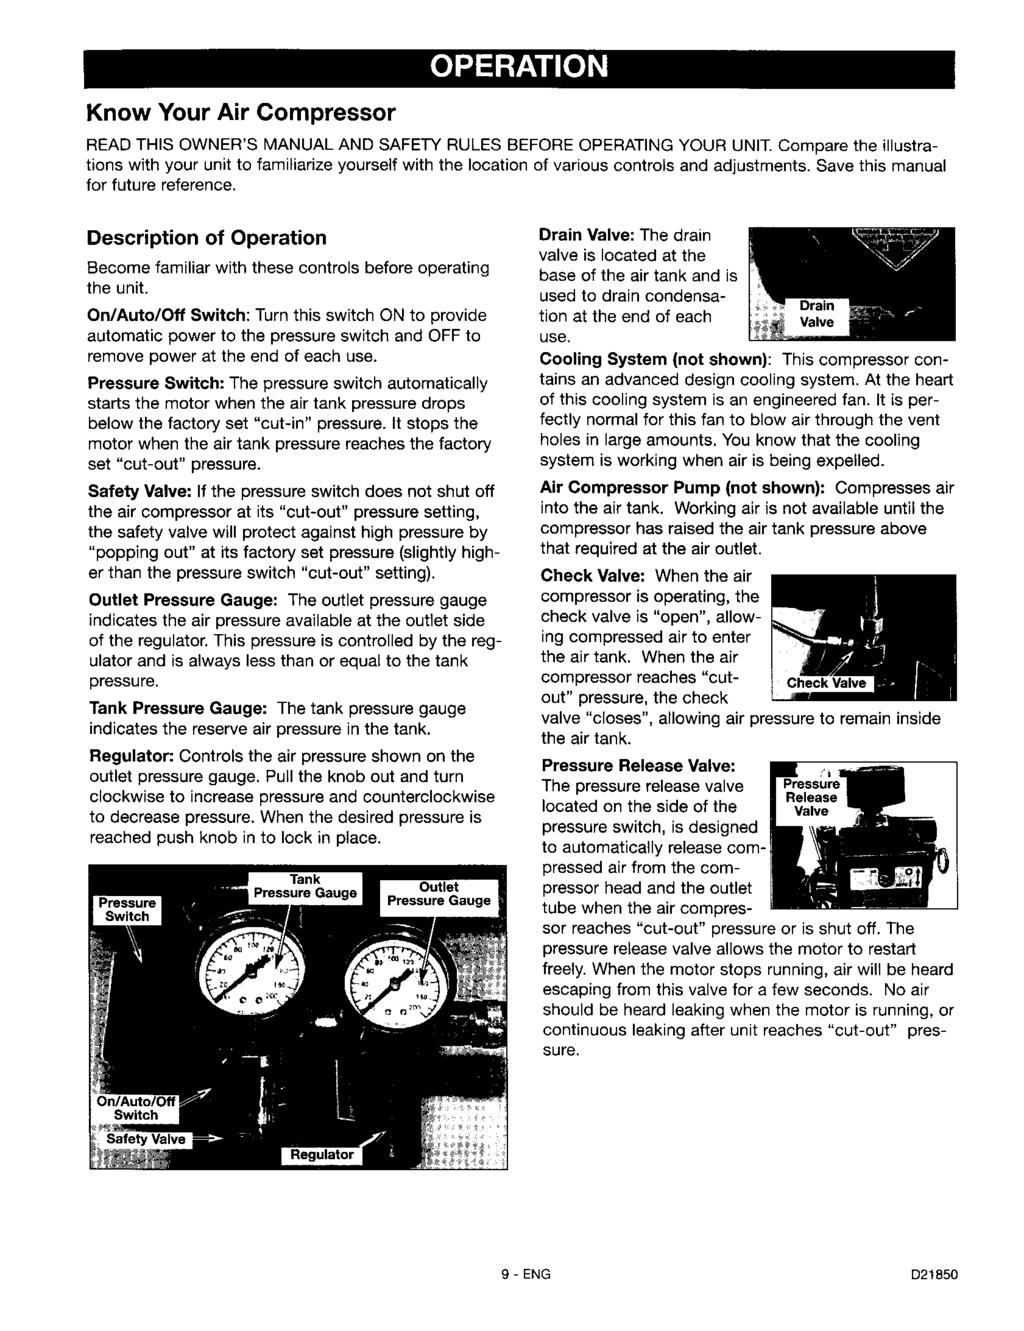 Know Your Air Compressor READ THIS OWNER'S MANUAL AND SAFETY RULES BEFORE OPERATING YOUR UNIT.